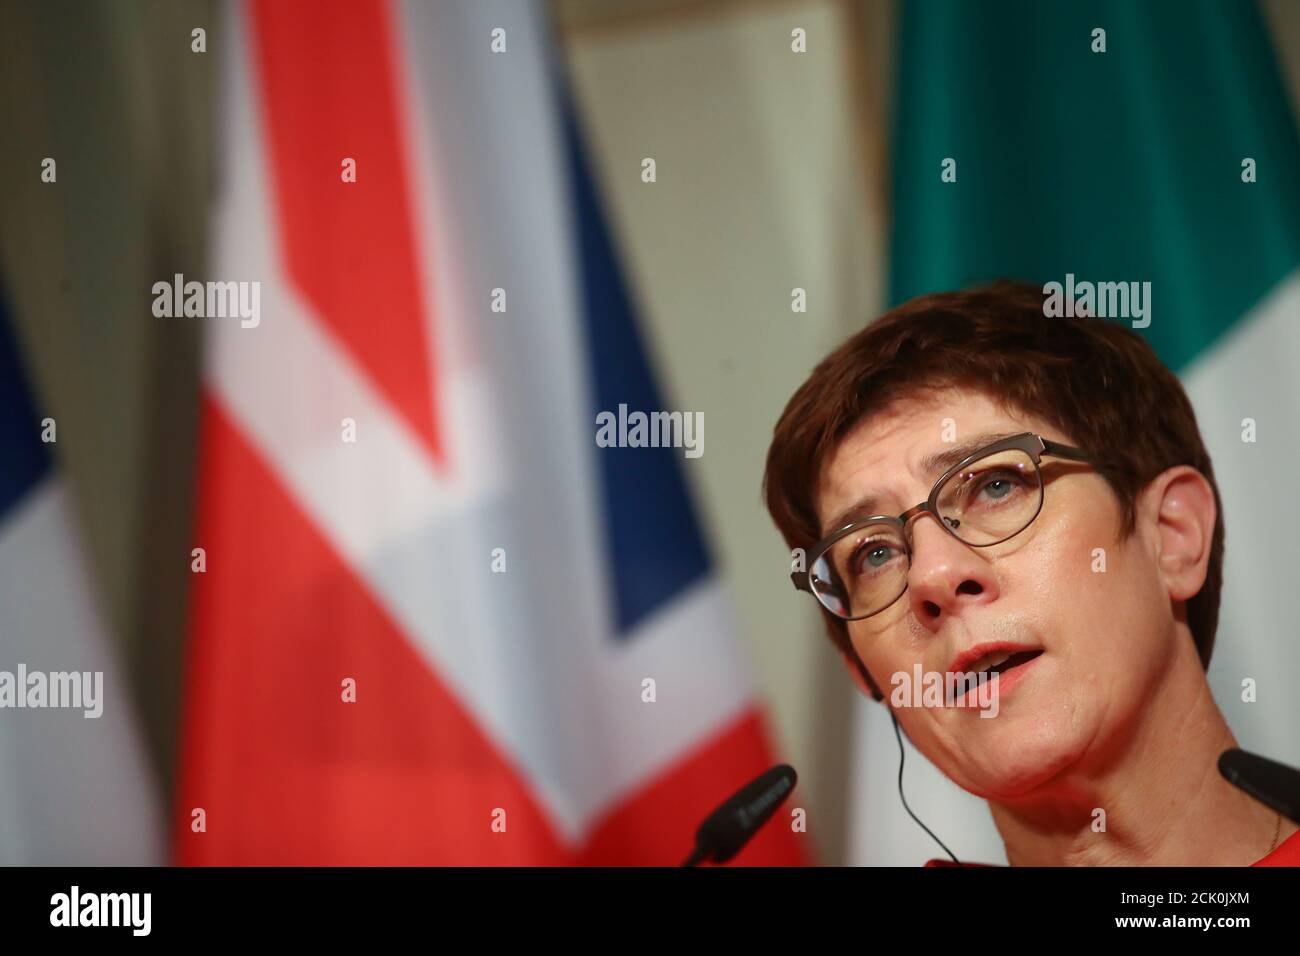 German Defence Minister Annegret Kramp-Karrenbauer speaks during a joint news conference with U.S. Defense Secretary Mark Esper (not pictured) after a meeting on anti-ISIS coalition in Munich, Germany, February 14, 2020. REUTERS/Michael Dalder Stock Photo